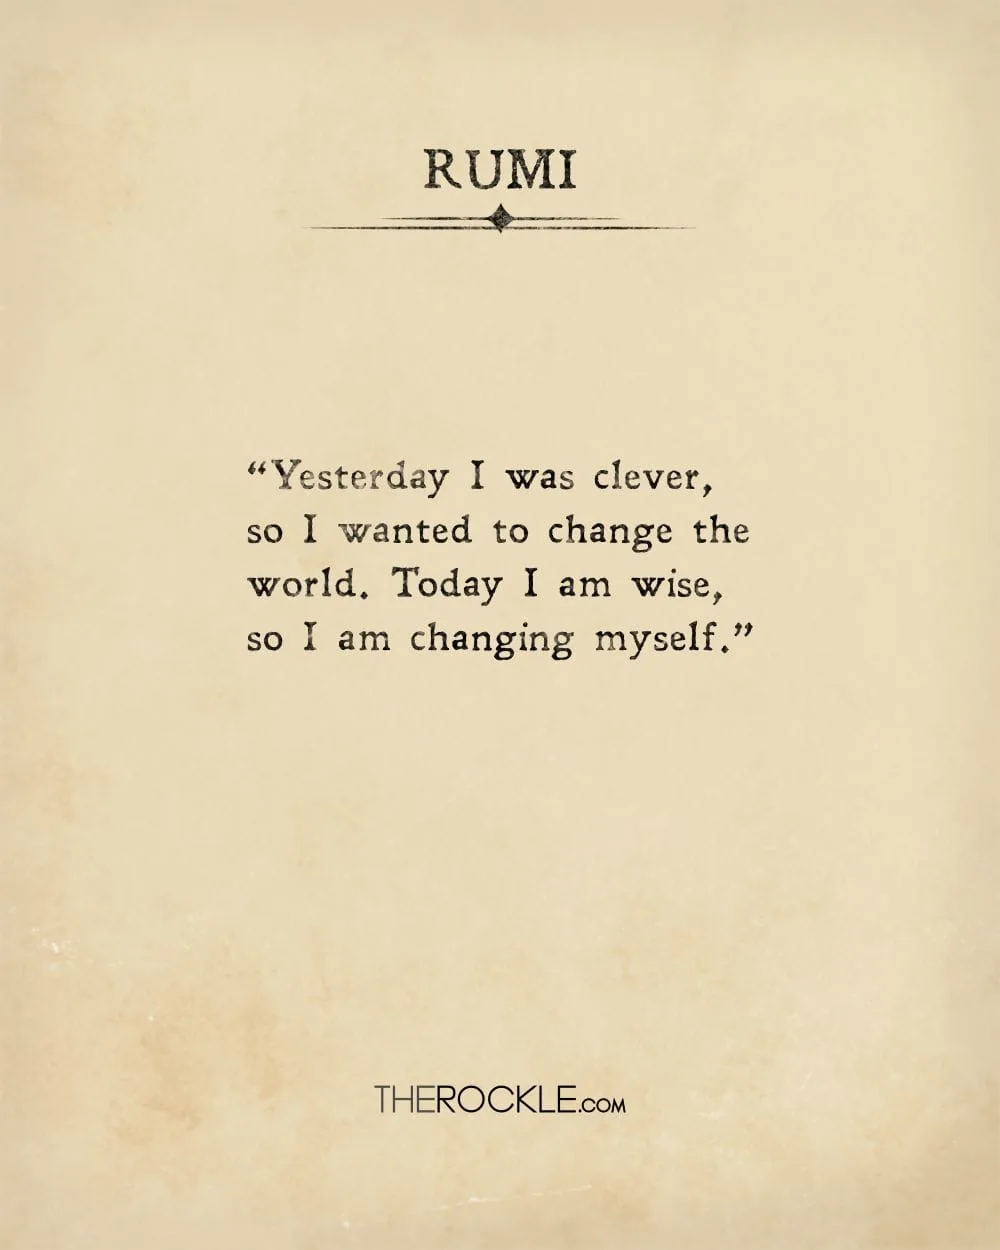 Rumi's quote about personal growth